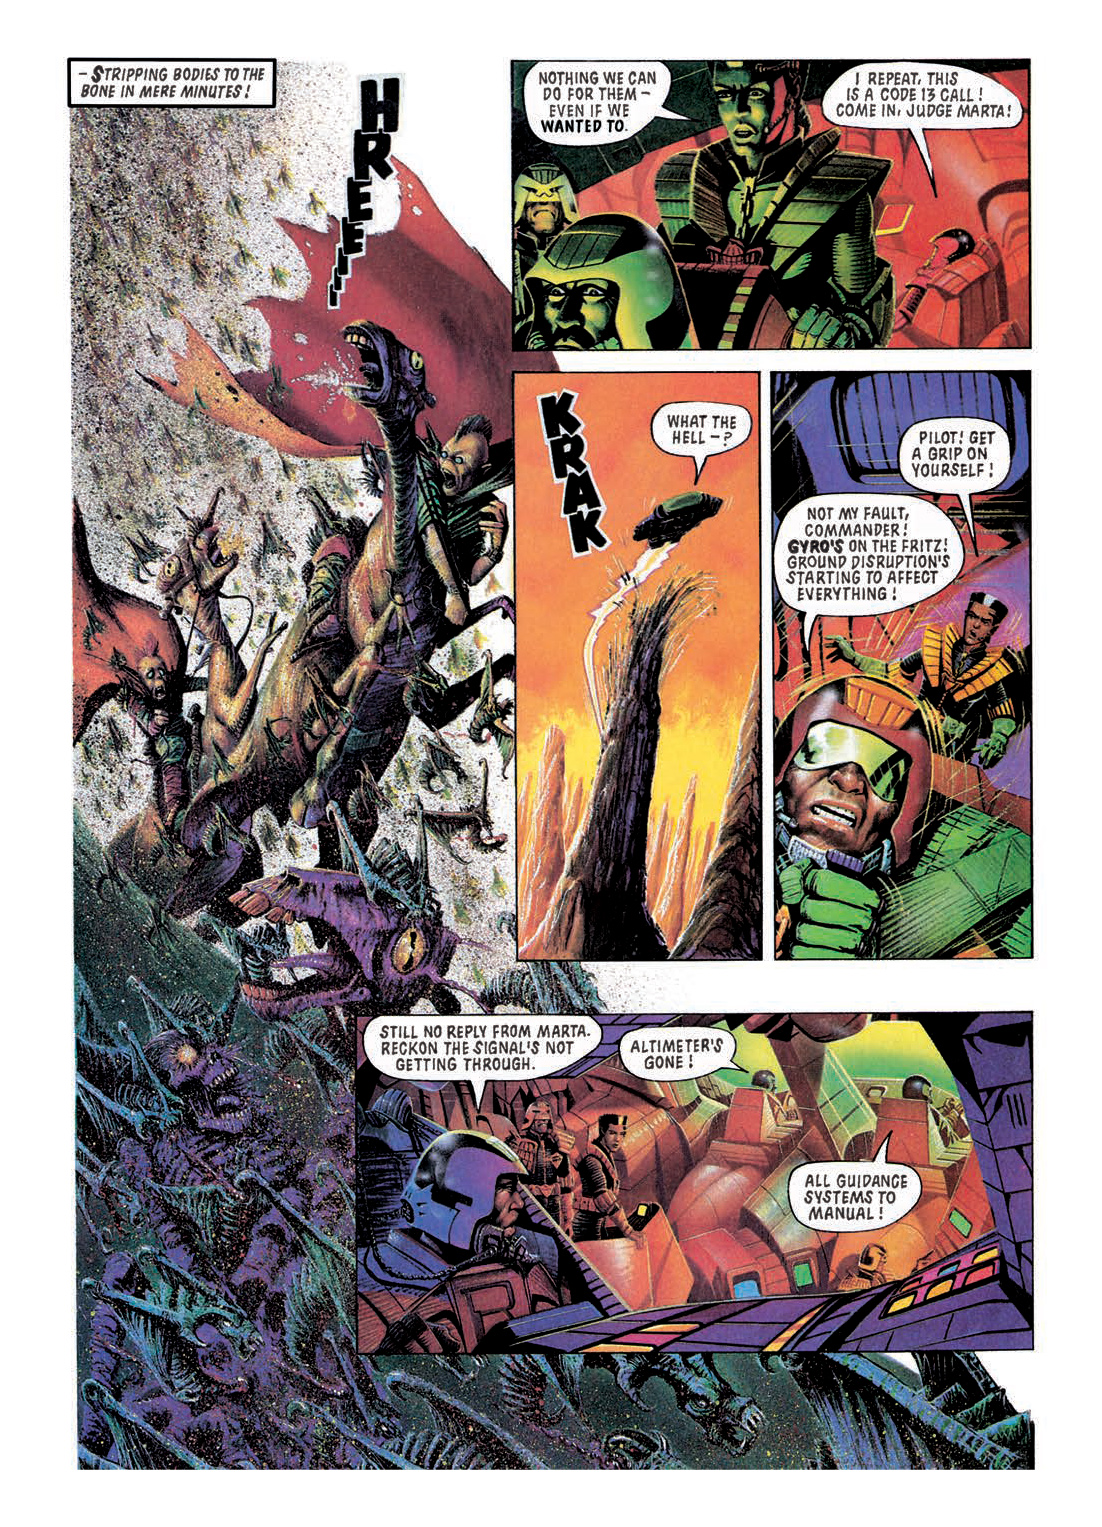 Read online Judge Dredd: The Restricted Files comic -  Issue # TPB 2 - 131